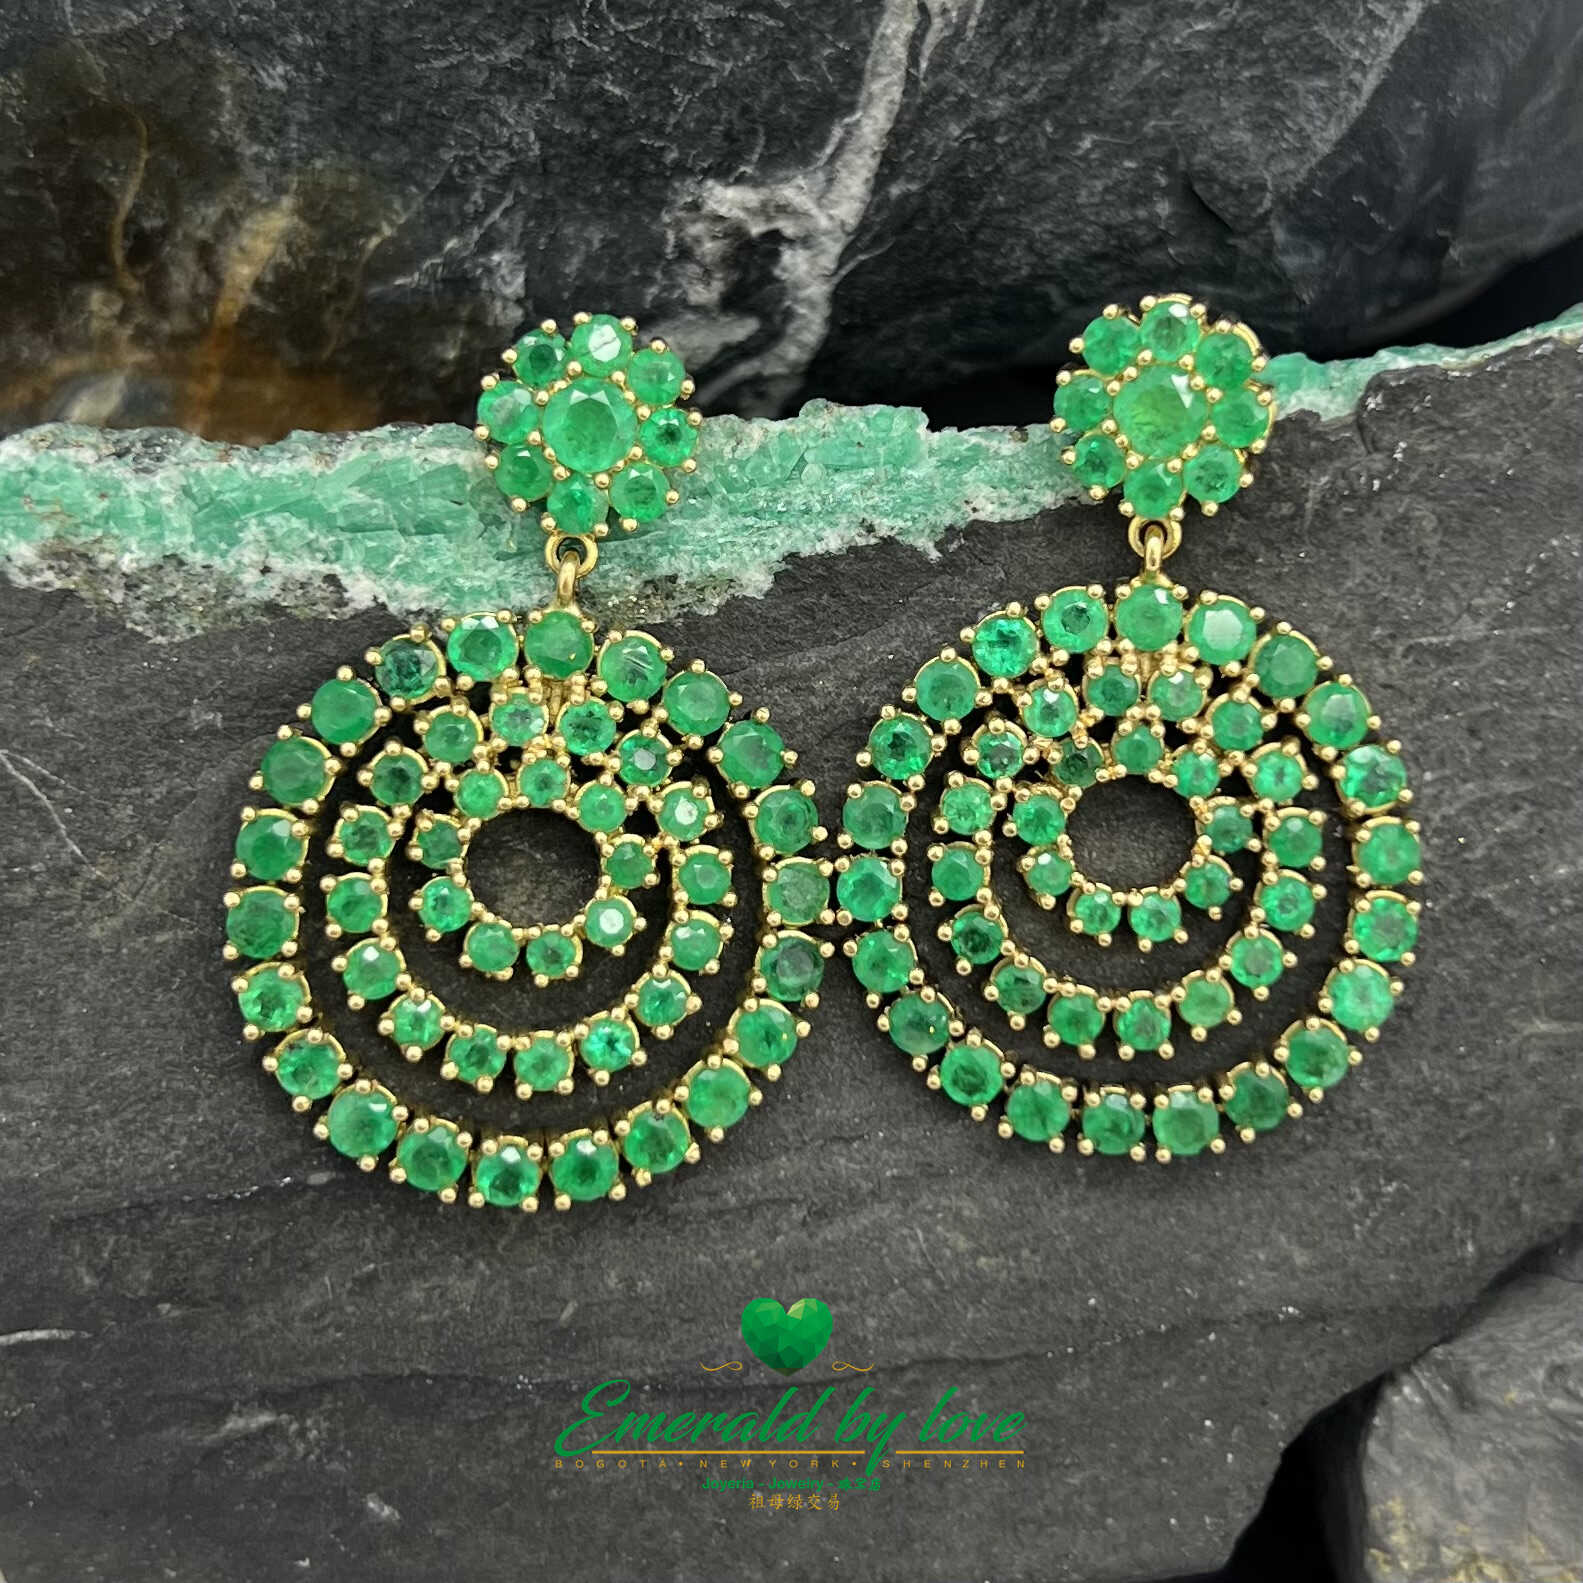 Impressive Elegance: 18k Yellow Gold Earrings with 10.94 tcw Colombian Round Emeralds